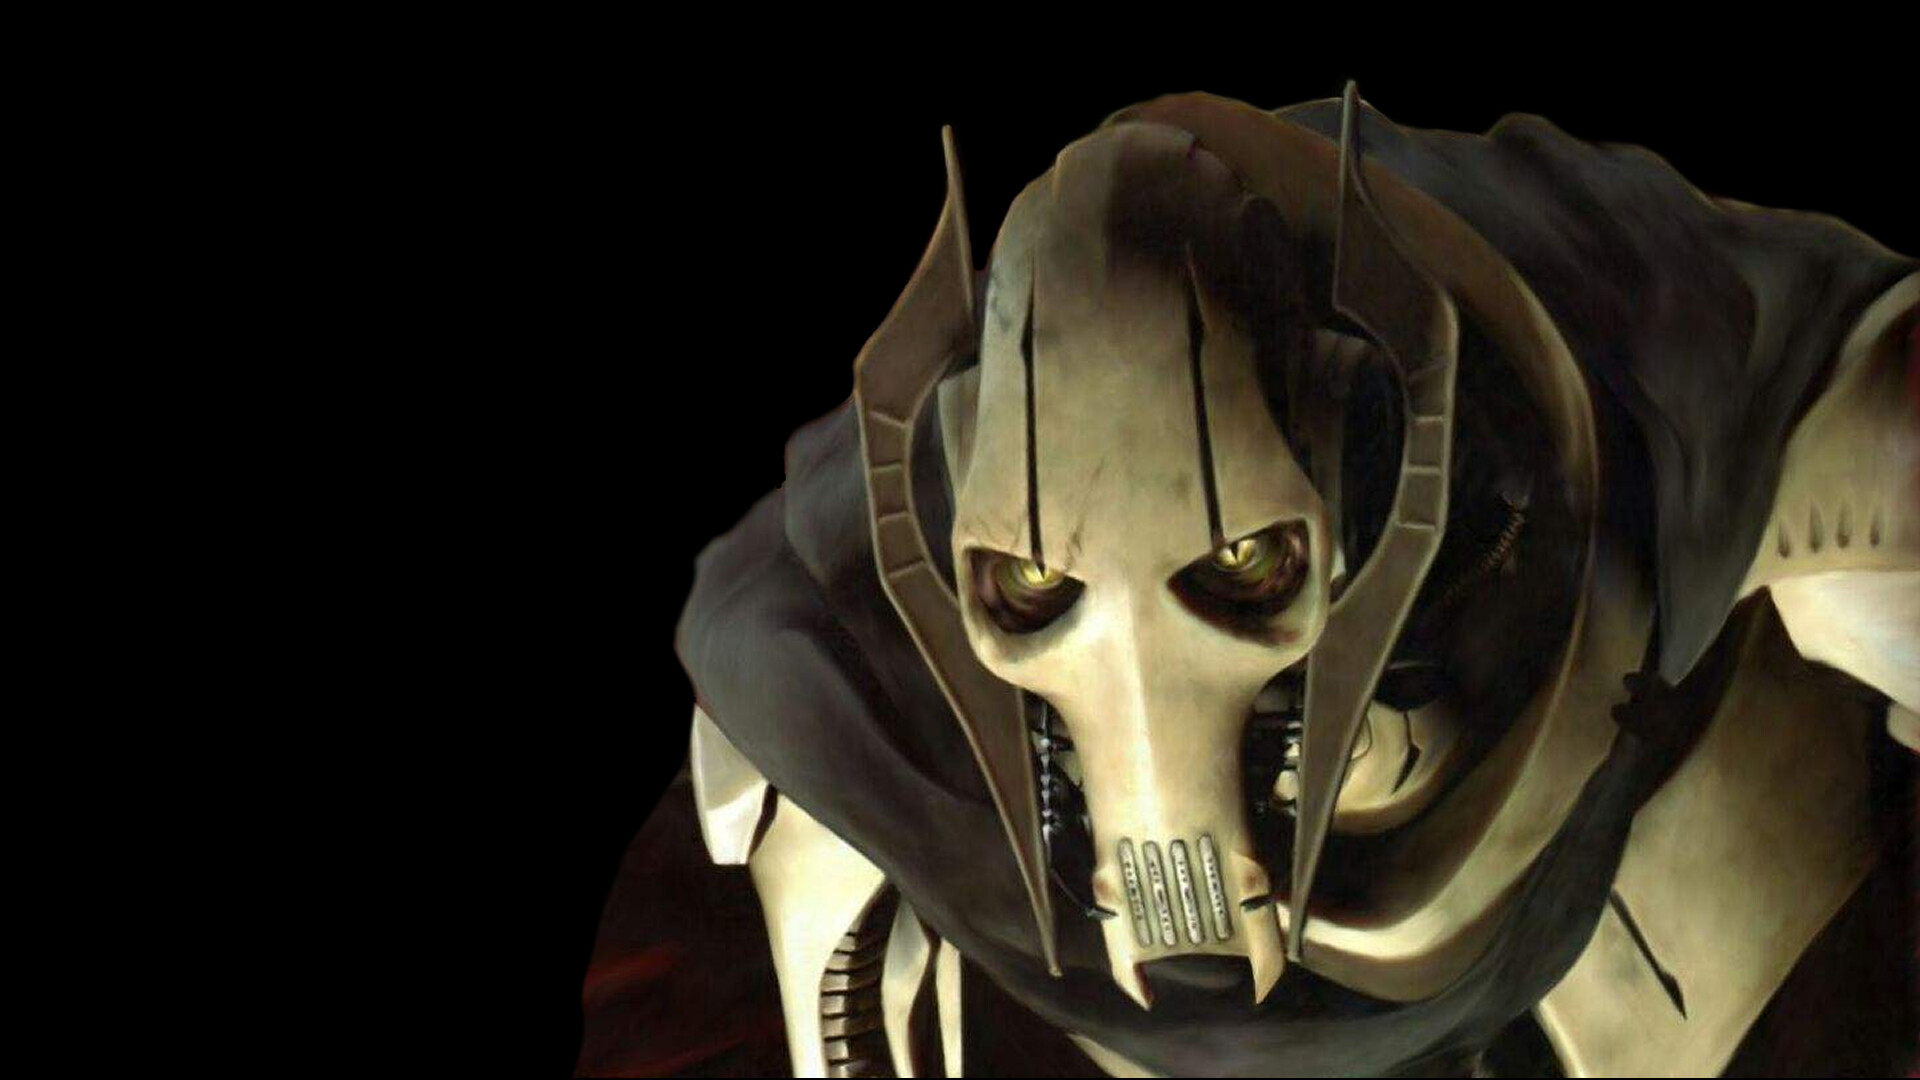 General Grievous: The body as a weapon, Lightning quick strikes and devastating blows, Quick to run from a fight. 1920x1080 Full HD Background.